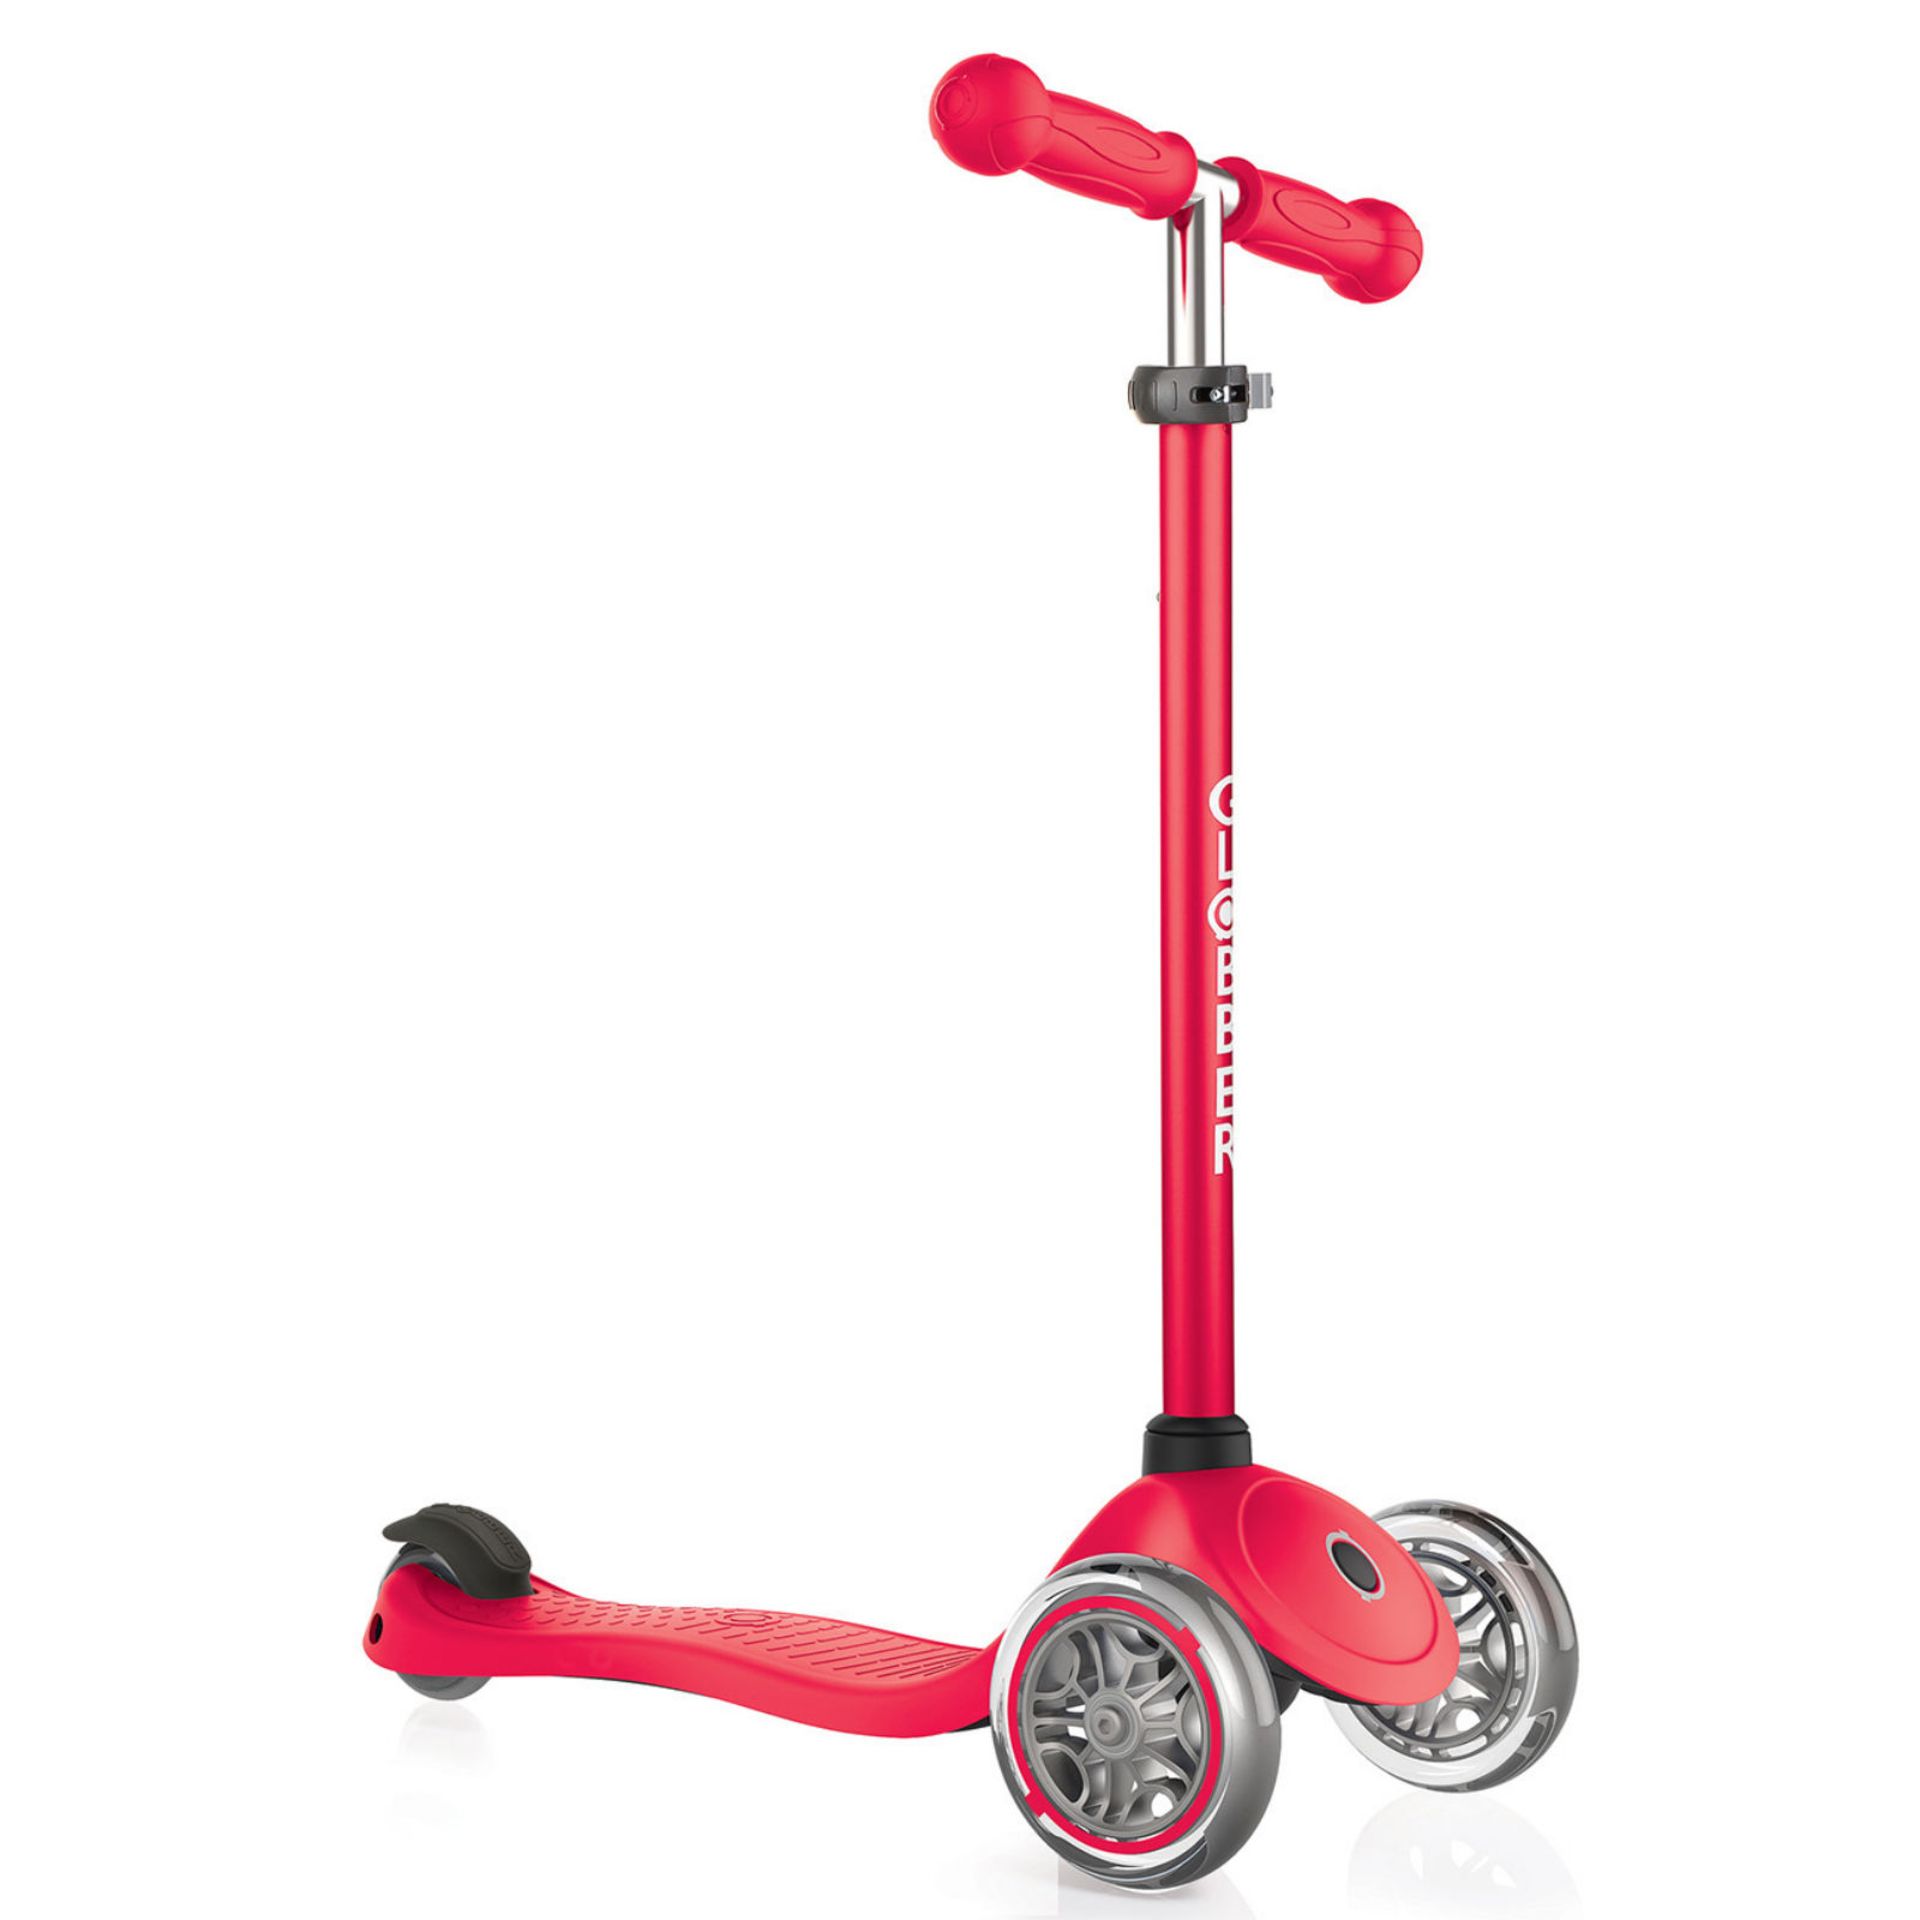 Globbber Primo Kids Scooter. RRP £99.99. The Globber Primo delivers on functionality and is ideal